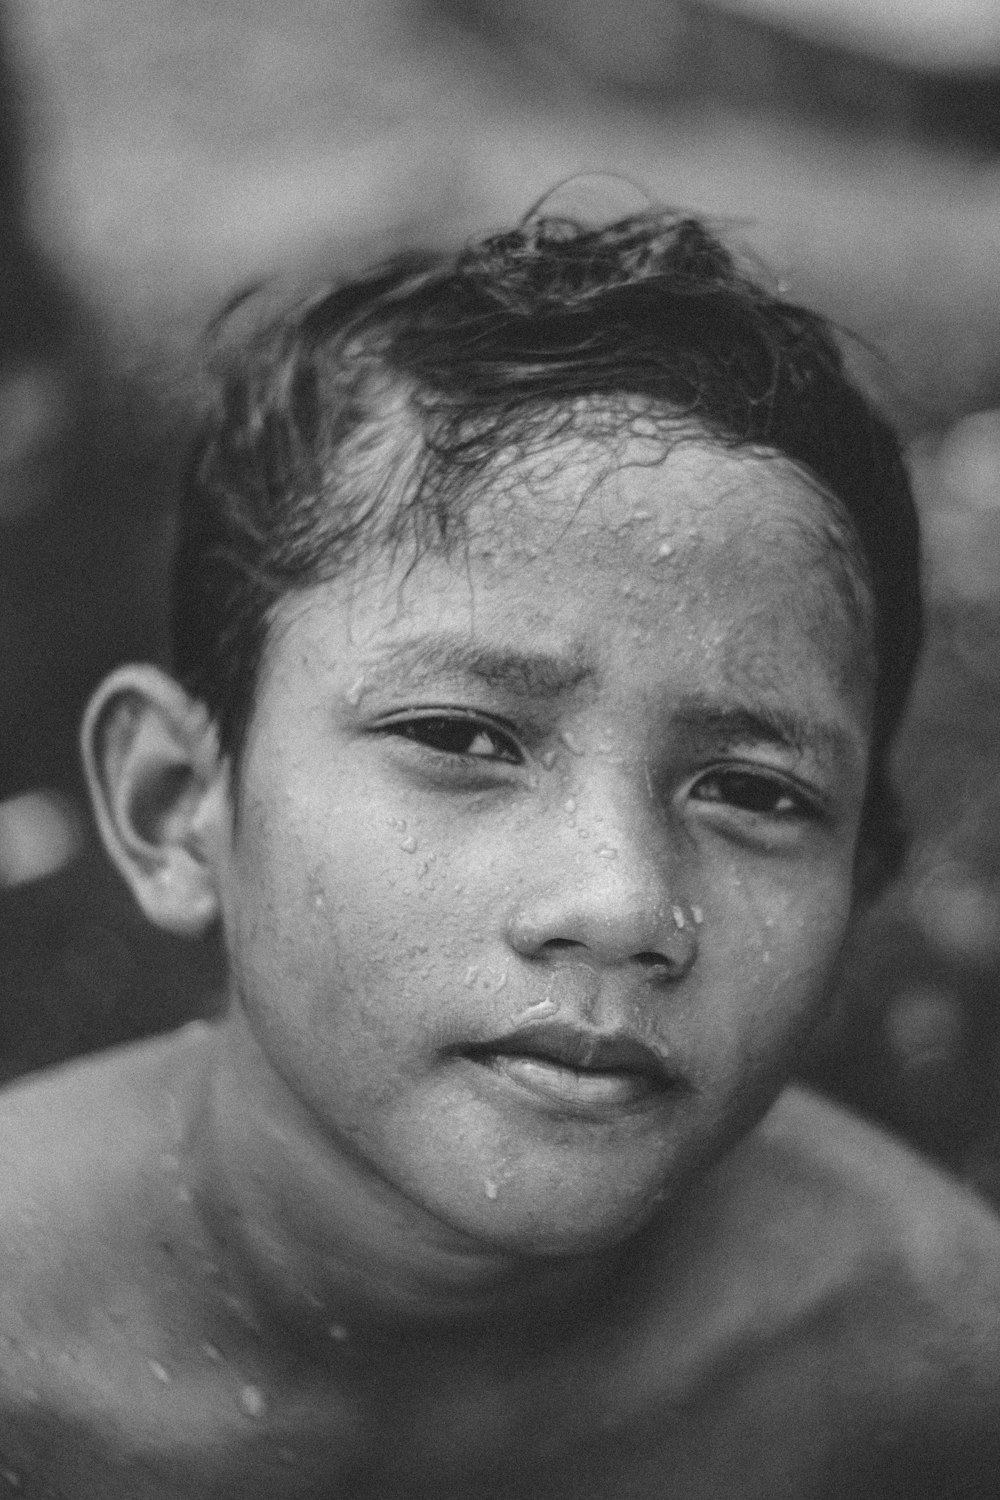 a black and white photo of a young boy